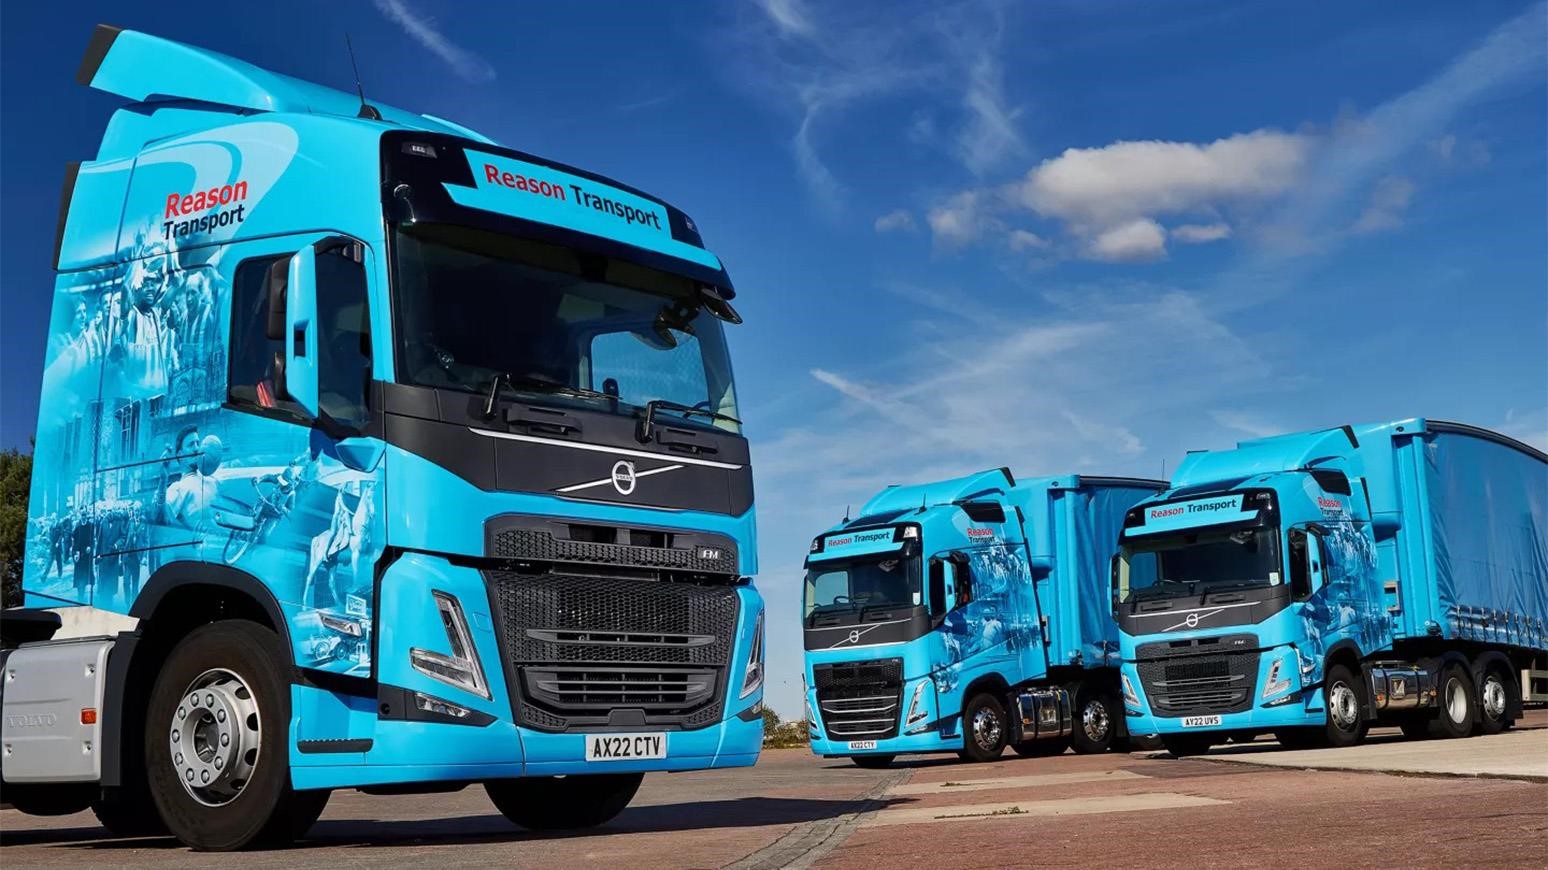 Reason Transport Adds First Volvo Trucks To Fleet: 2 FH 460 & 3 FM 460 Tractor Units